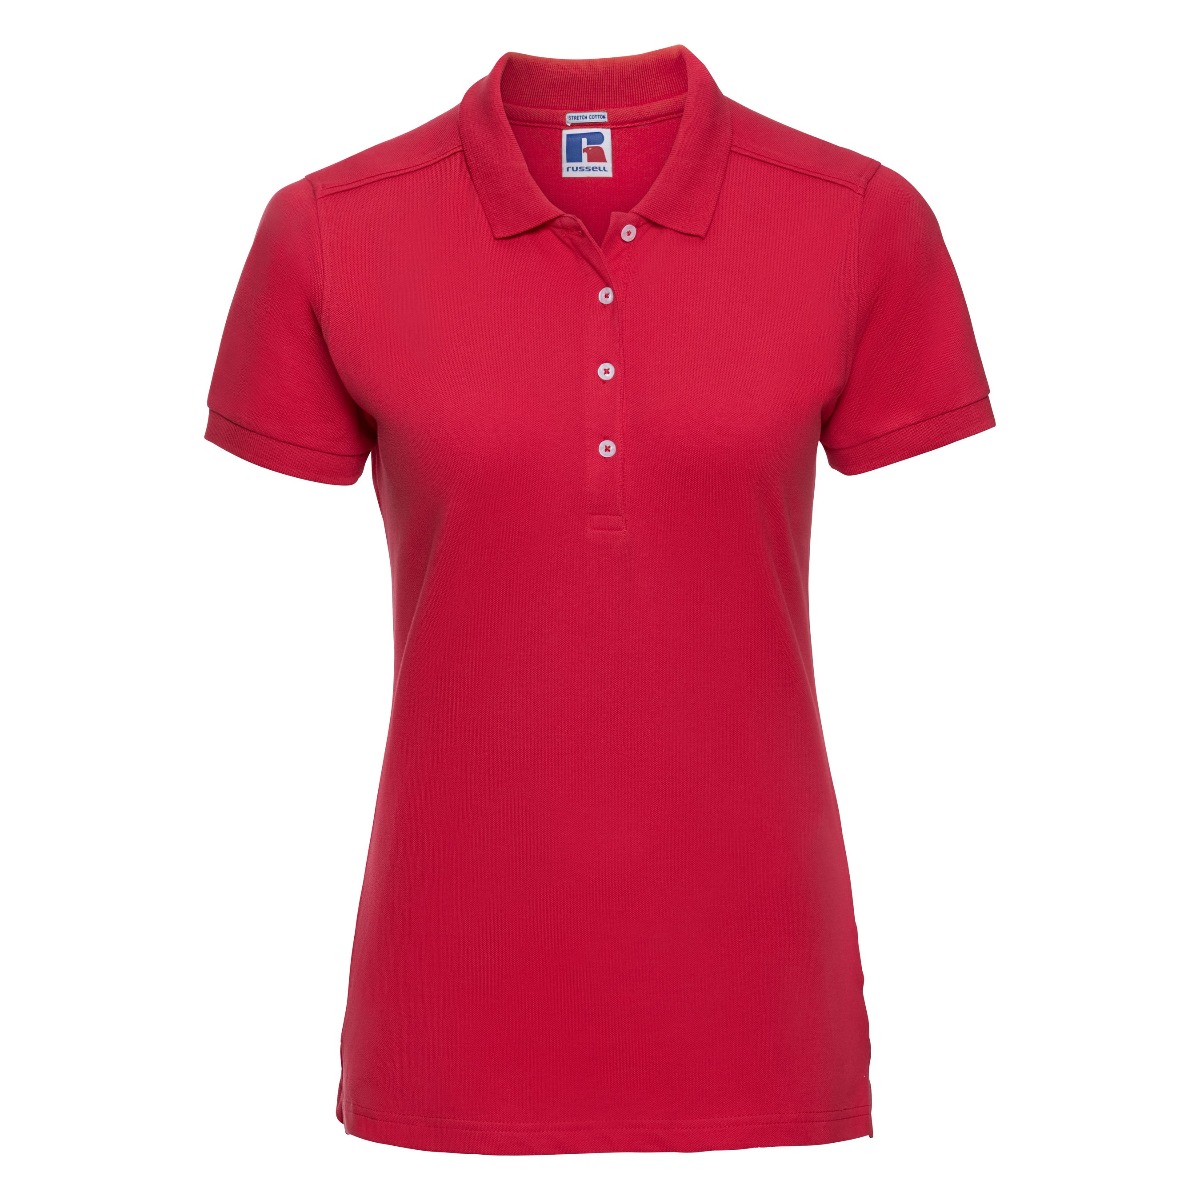 ax-httpswebsystems.s3.amazonaws.comtmp_for_downloadrussell-womens-stretch-classic-red_1.jpg